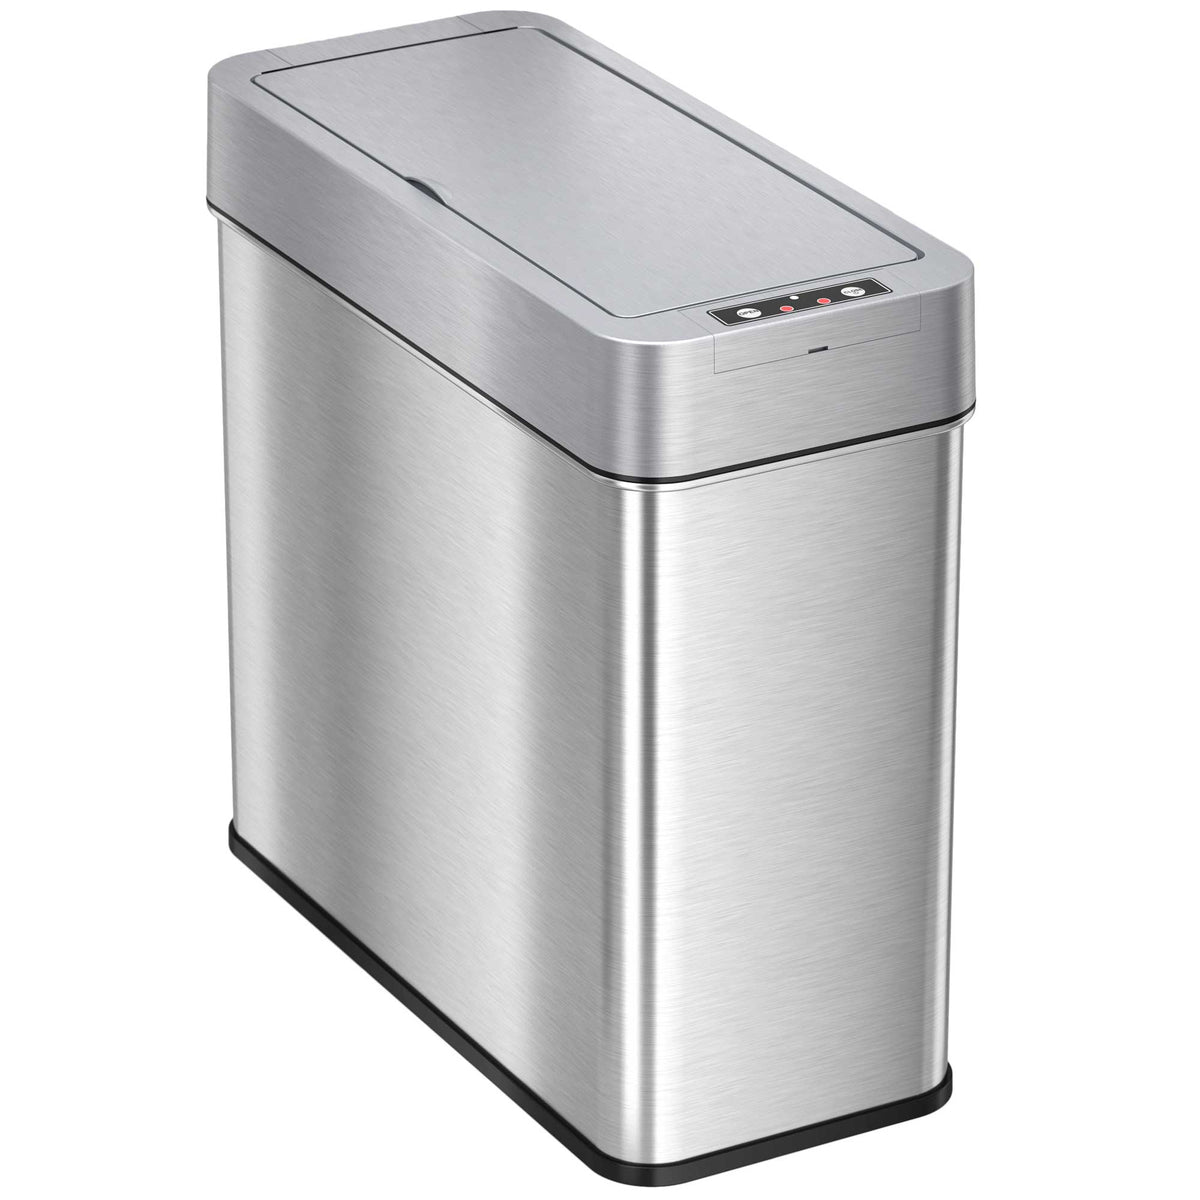 4 Gallon Stainless Steel Slim Sensor Trash Can (Right Side Lid Open)